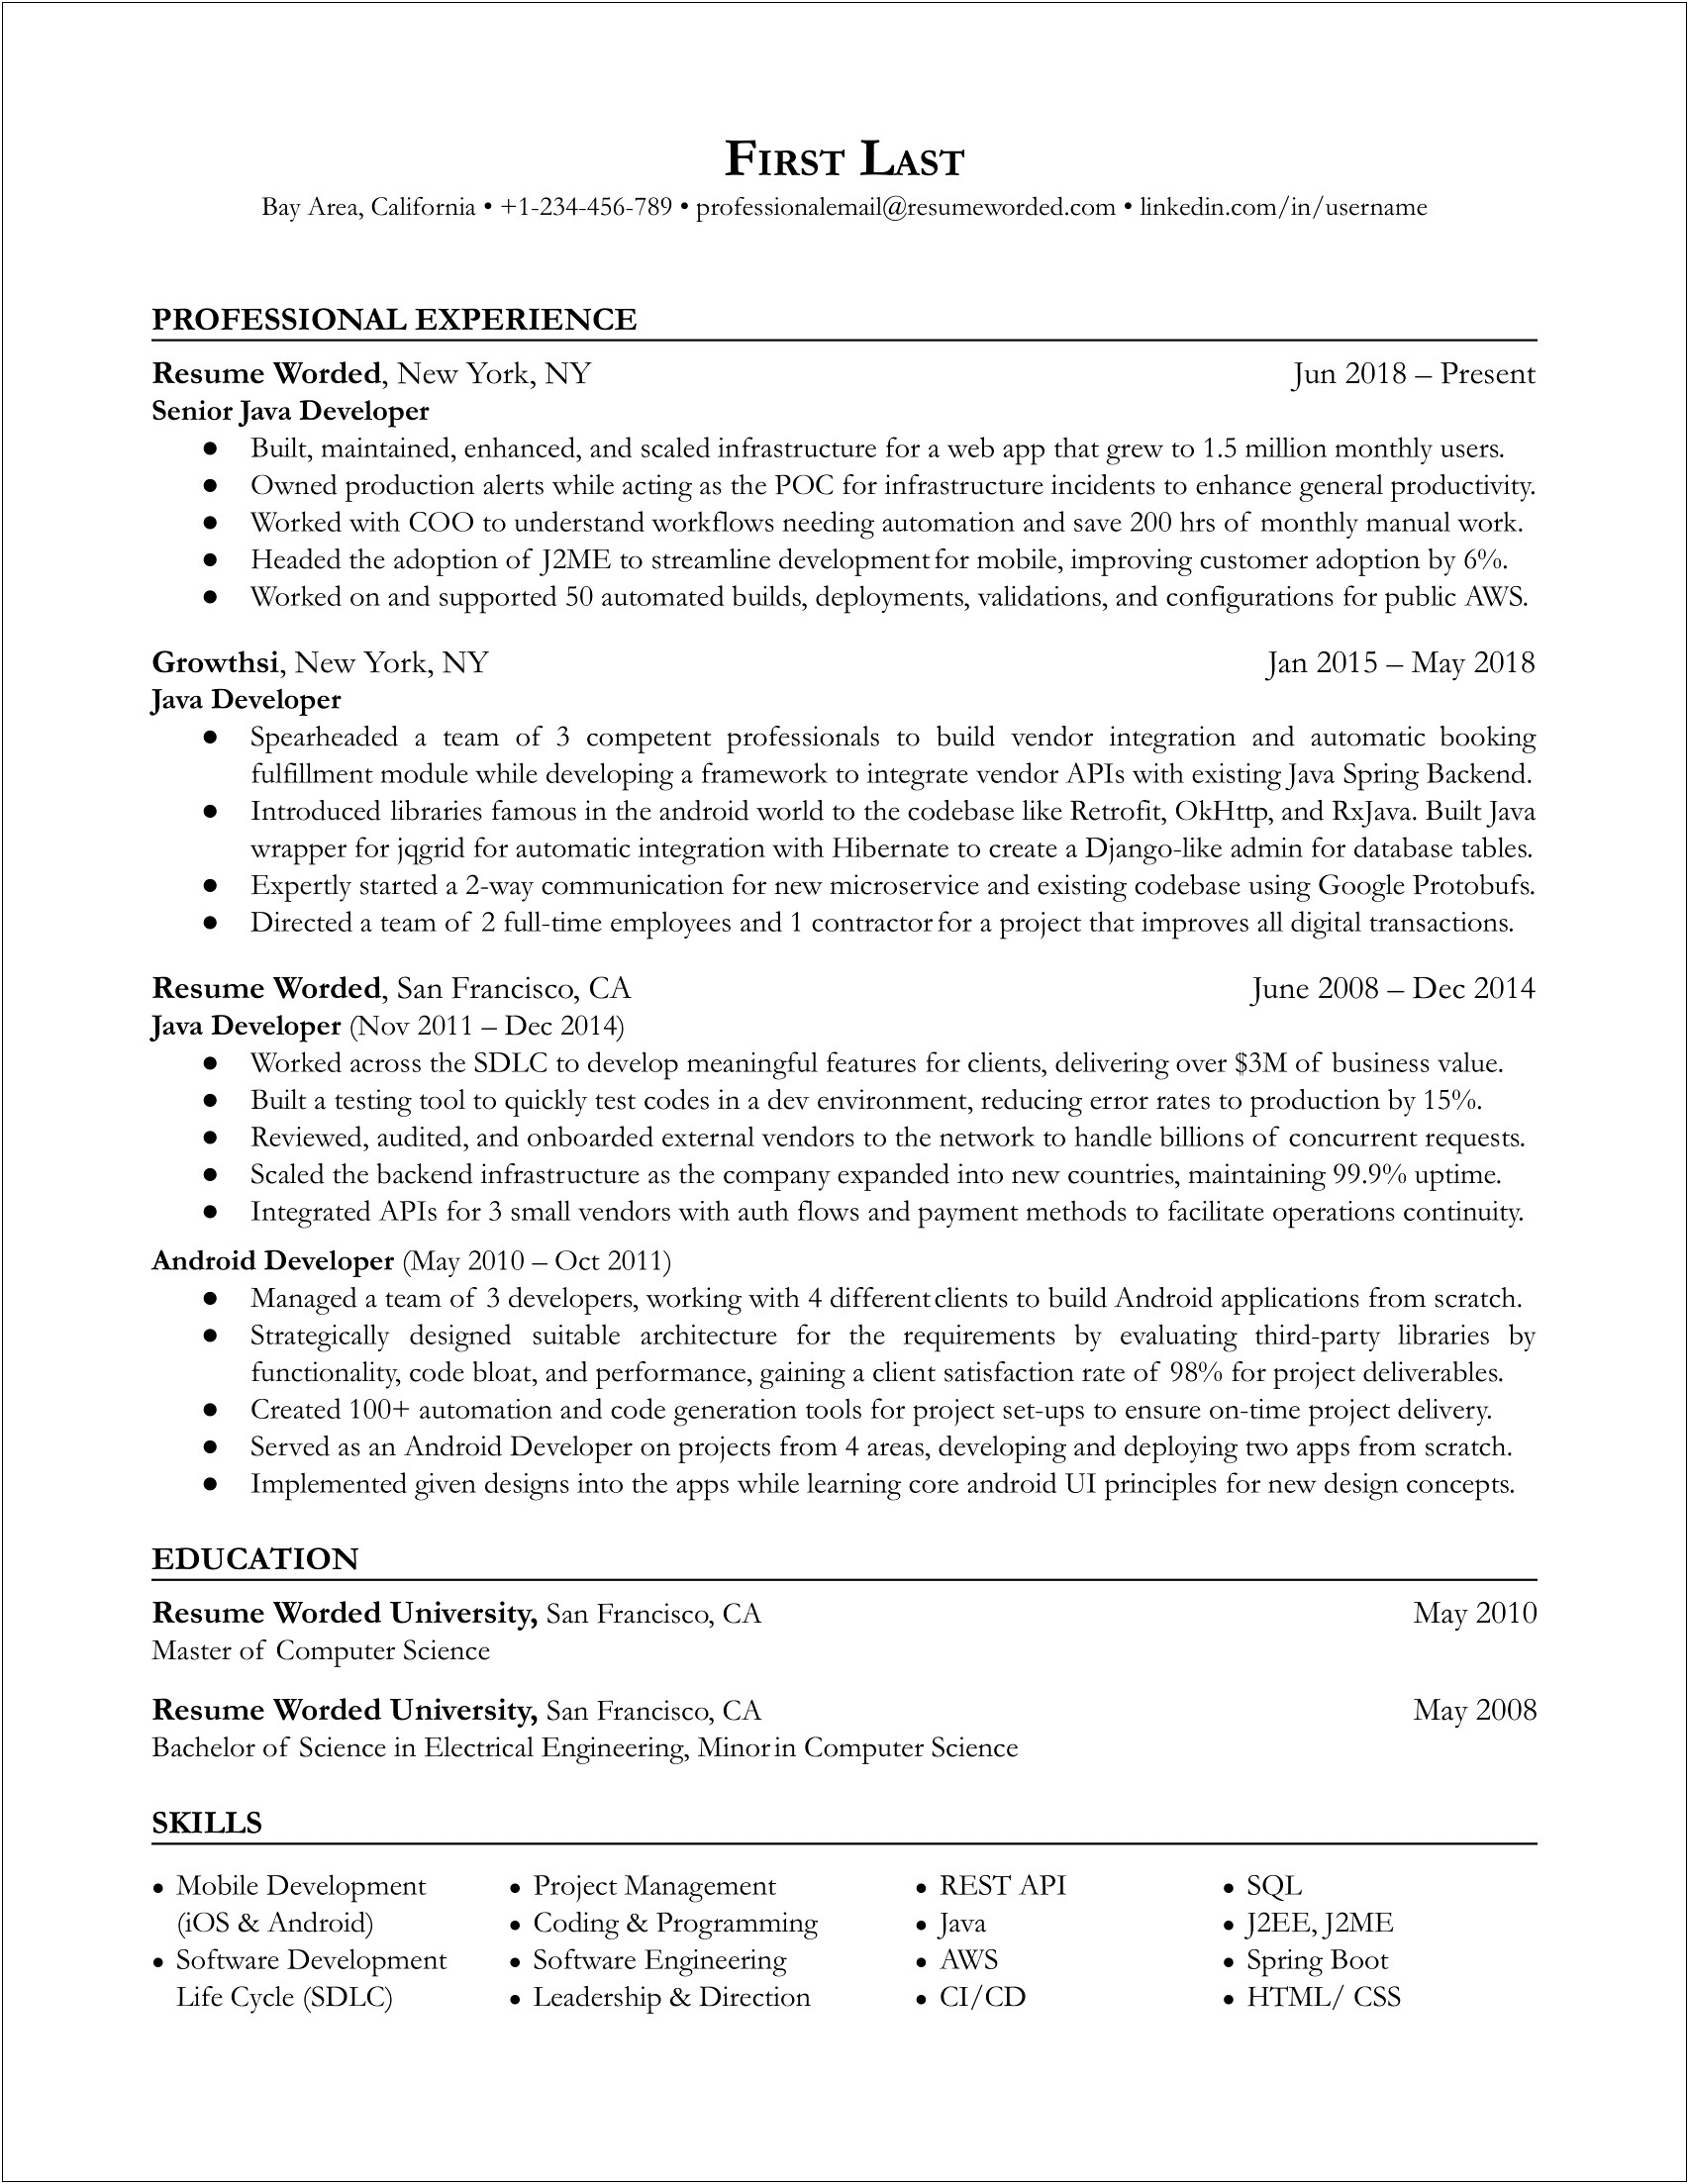 Sample Resumes Showing Experience With Spring Bot